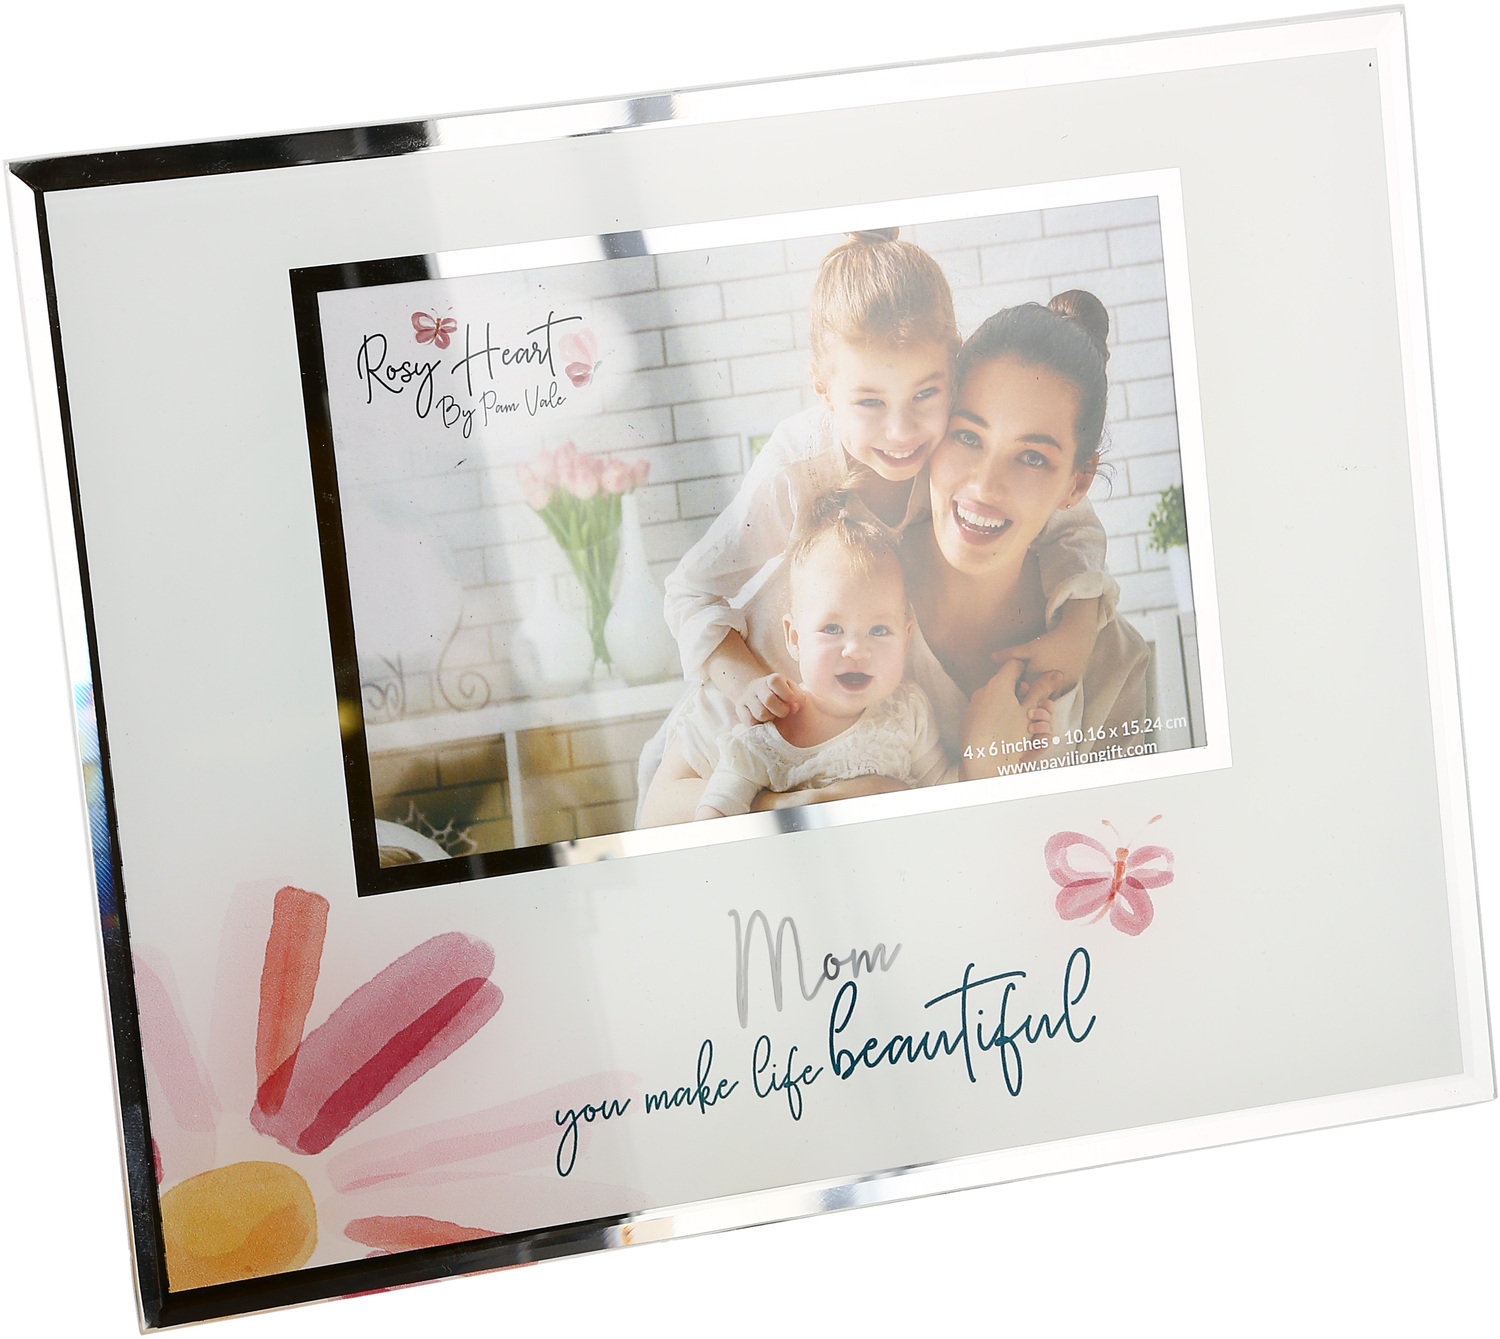 Mom by Rosy Heart - Mom - 9.25" x 7.25" Frame
(Holds 6" x 4" Photo)